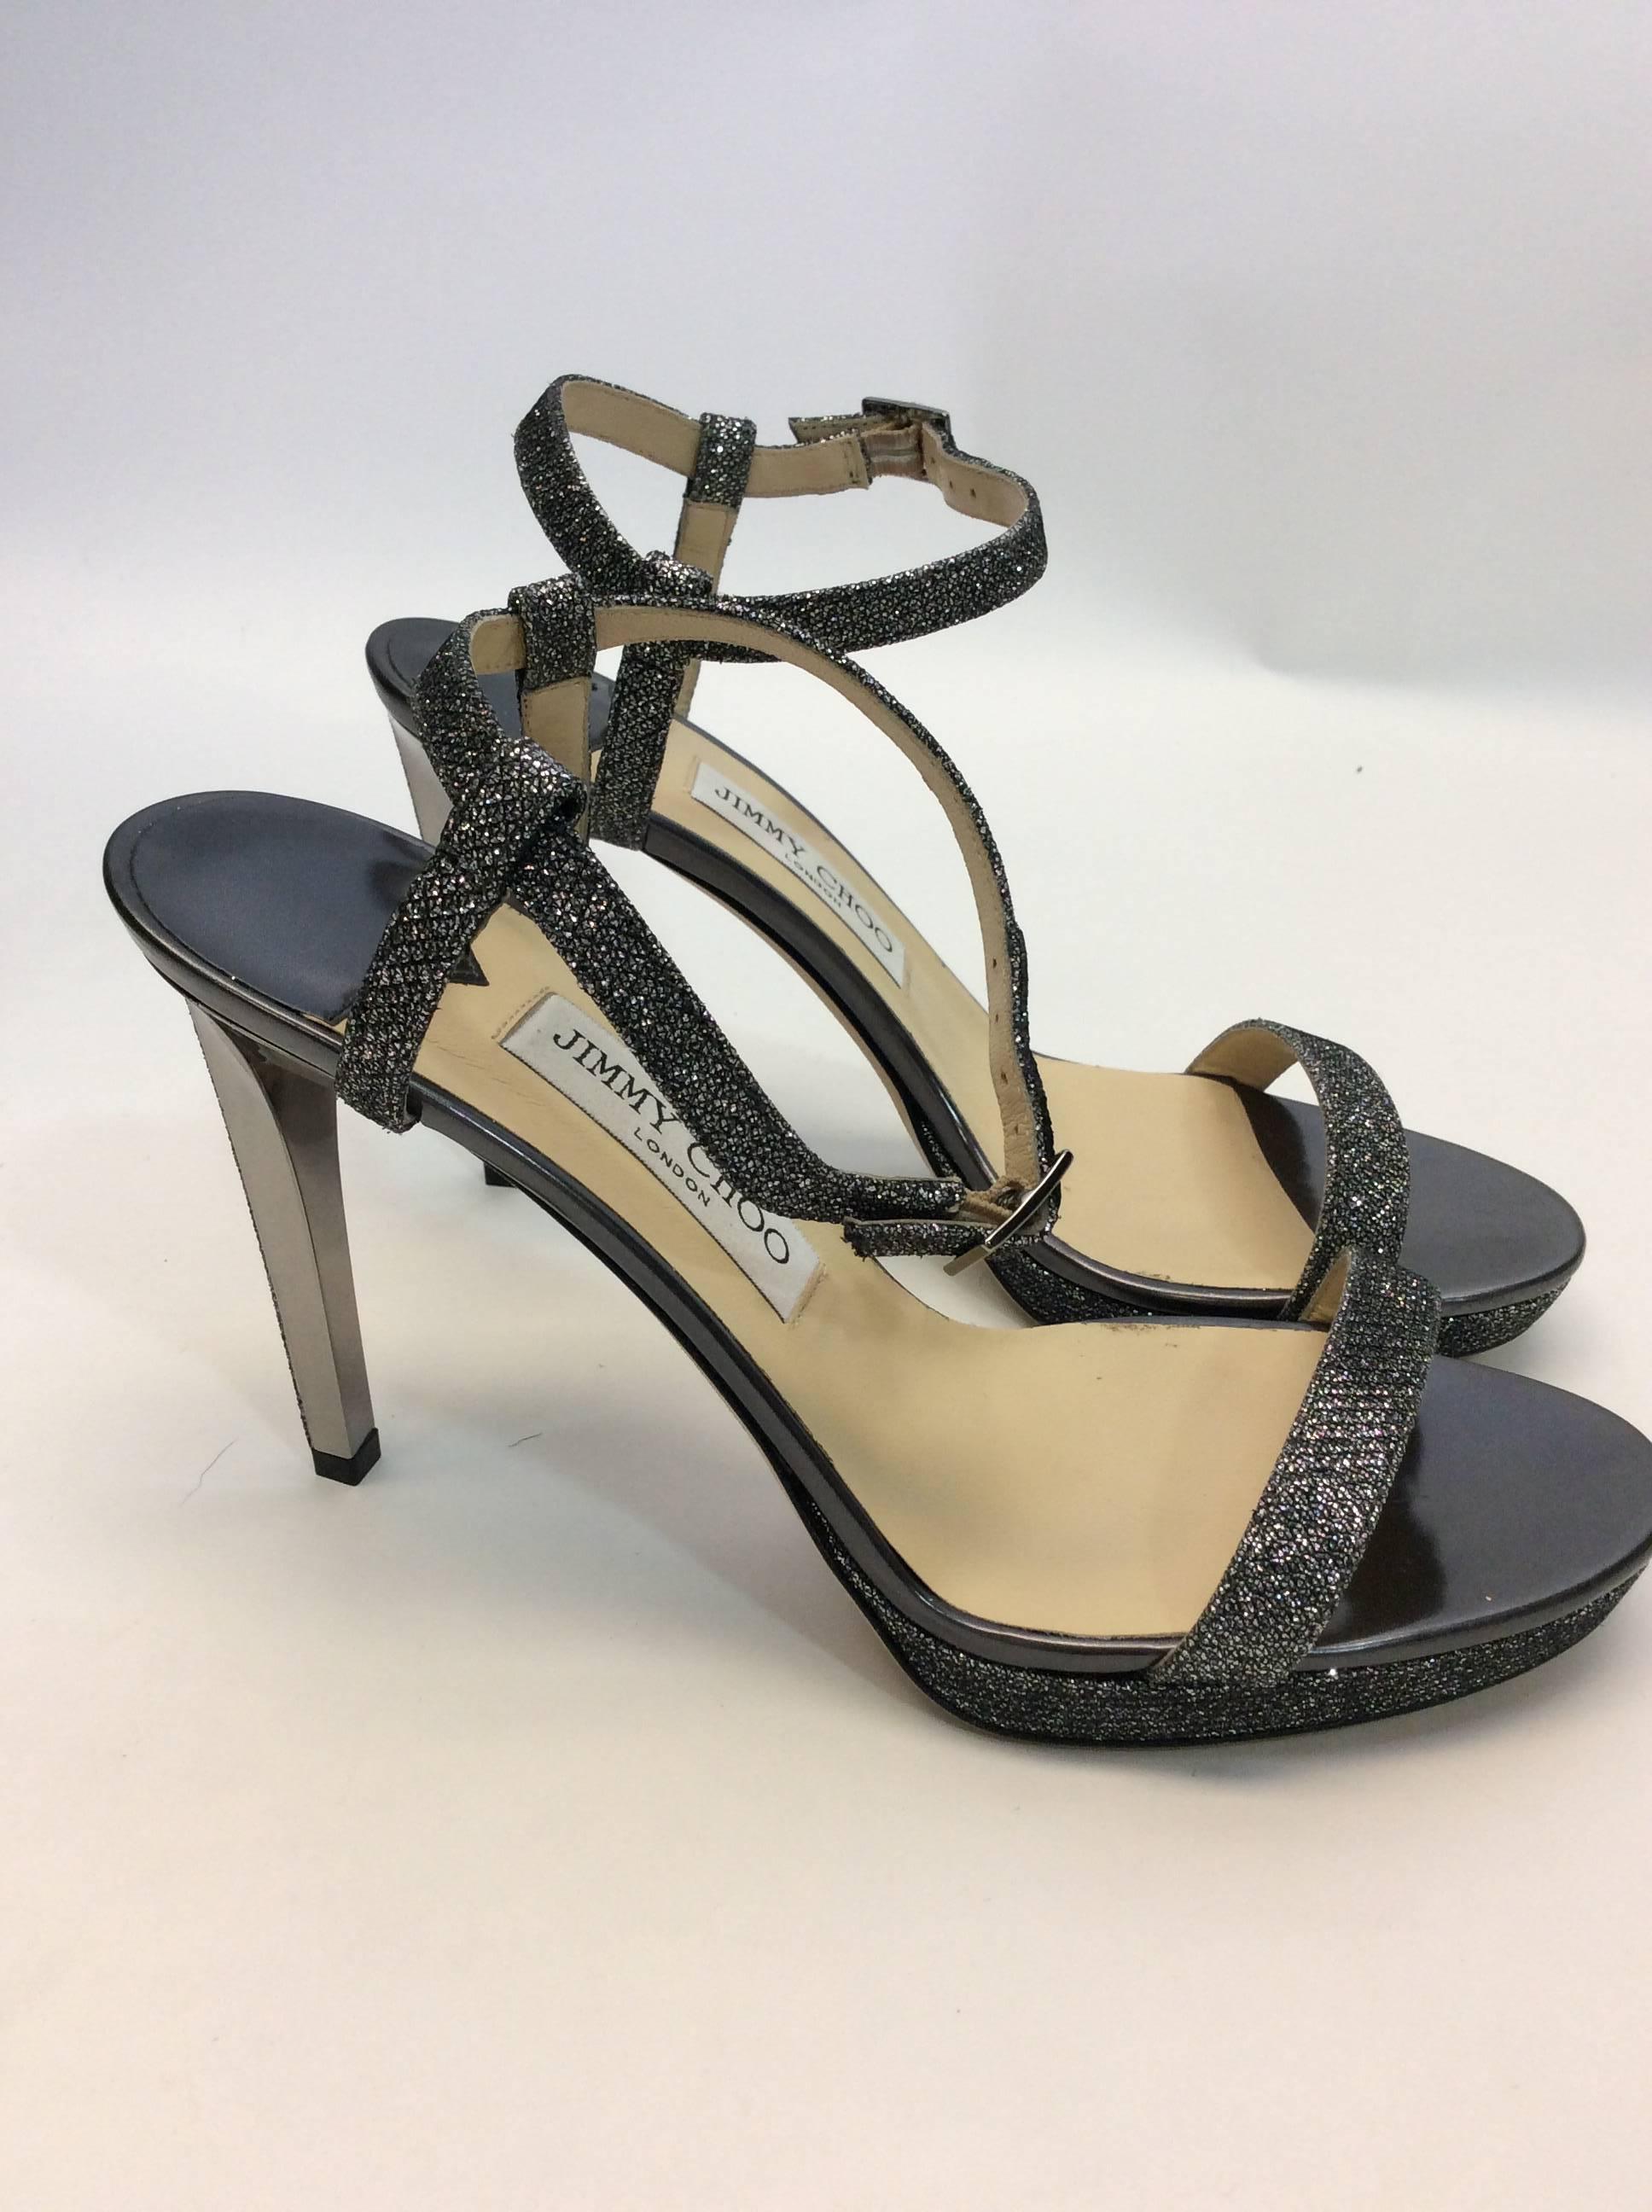 Jimmy Choo NIB Glitter Strap Heels In New Condition For Sale In Narberth, PA